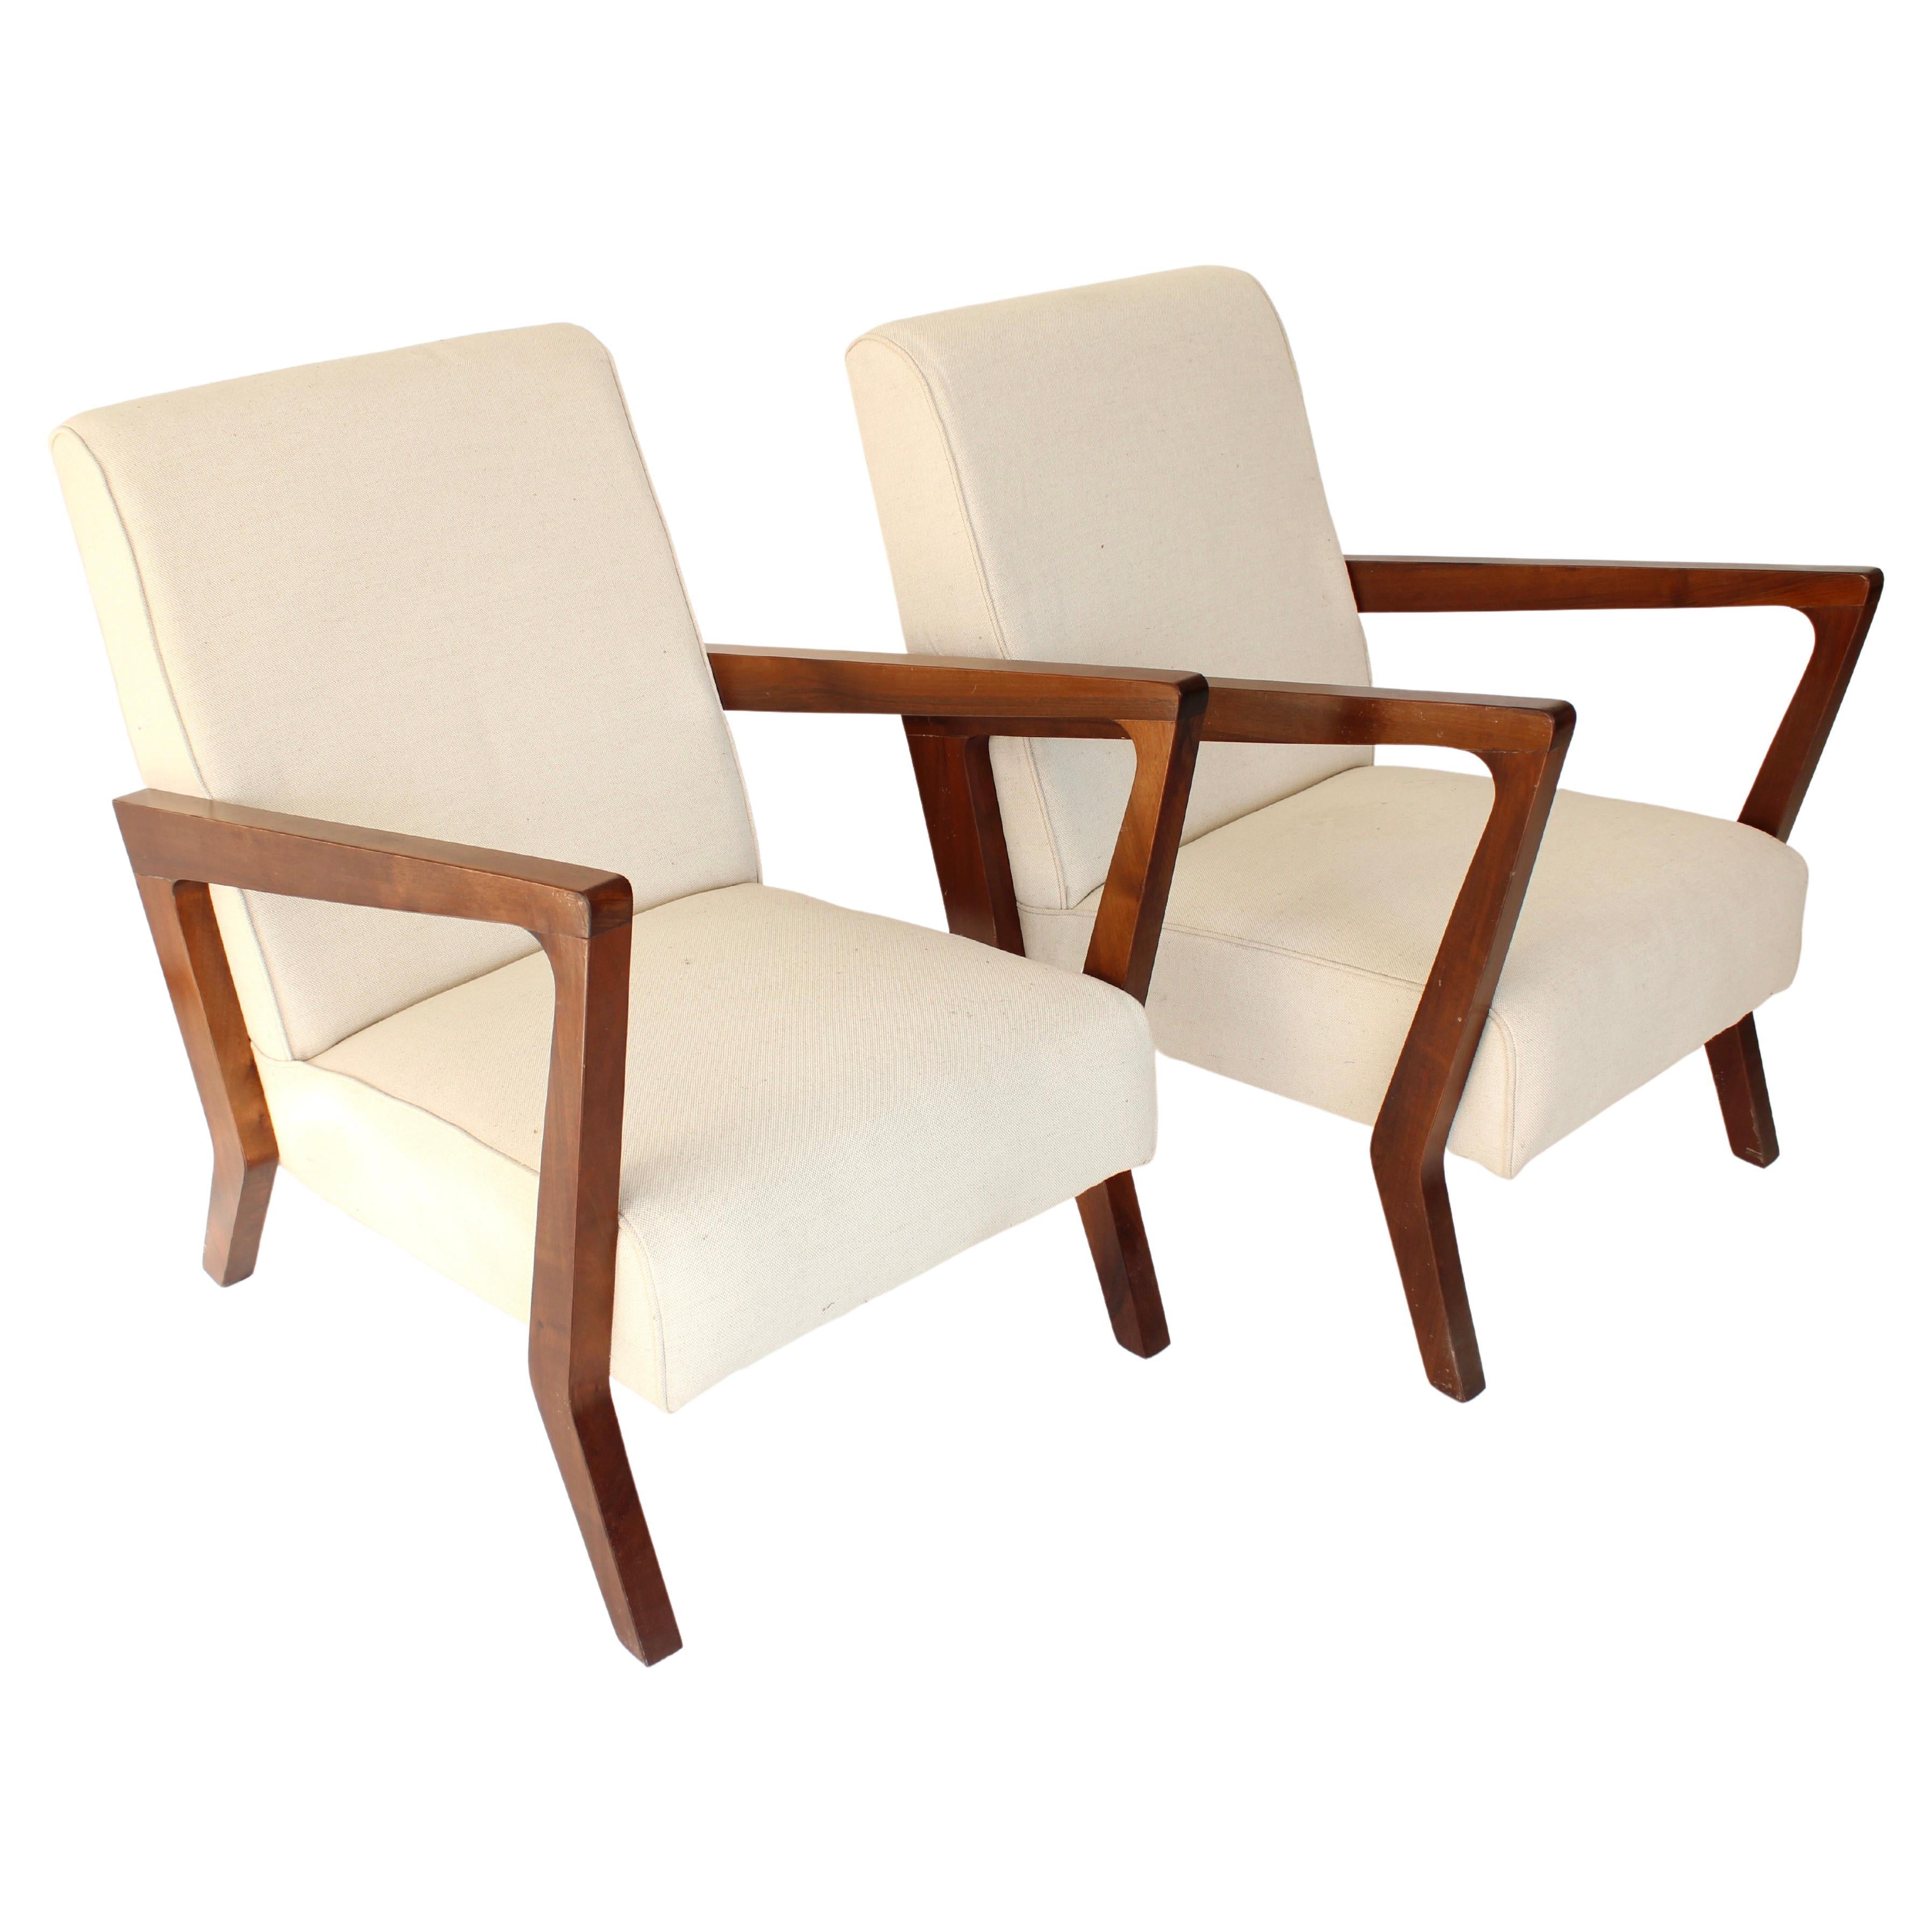 Pair of Lounge Chairs Walnut and Upholstery Attributed to Gio Ponti Italy c 1950